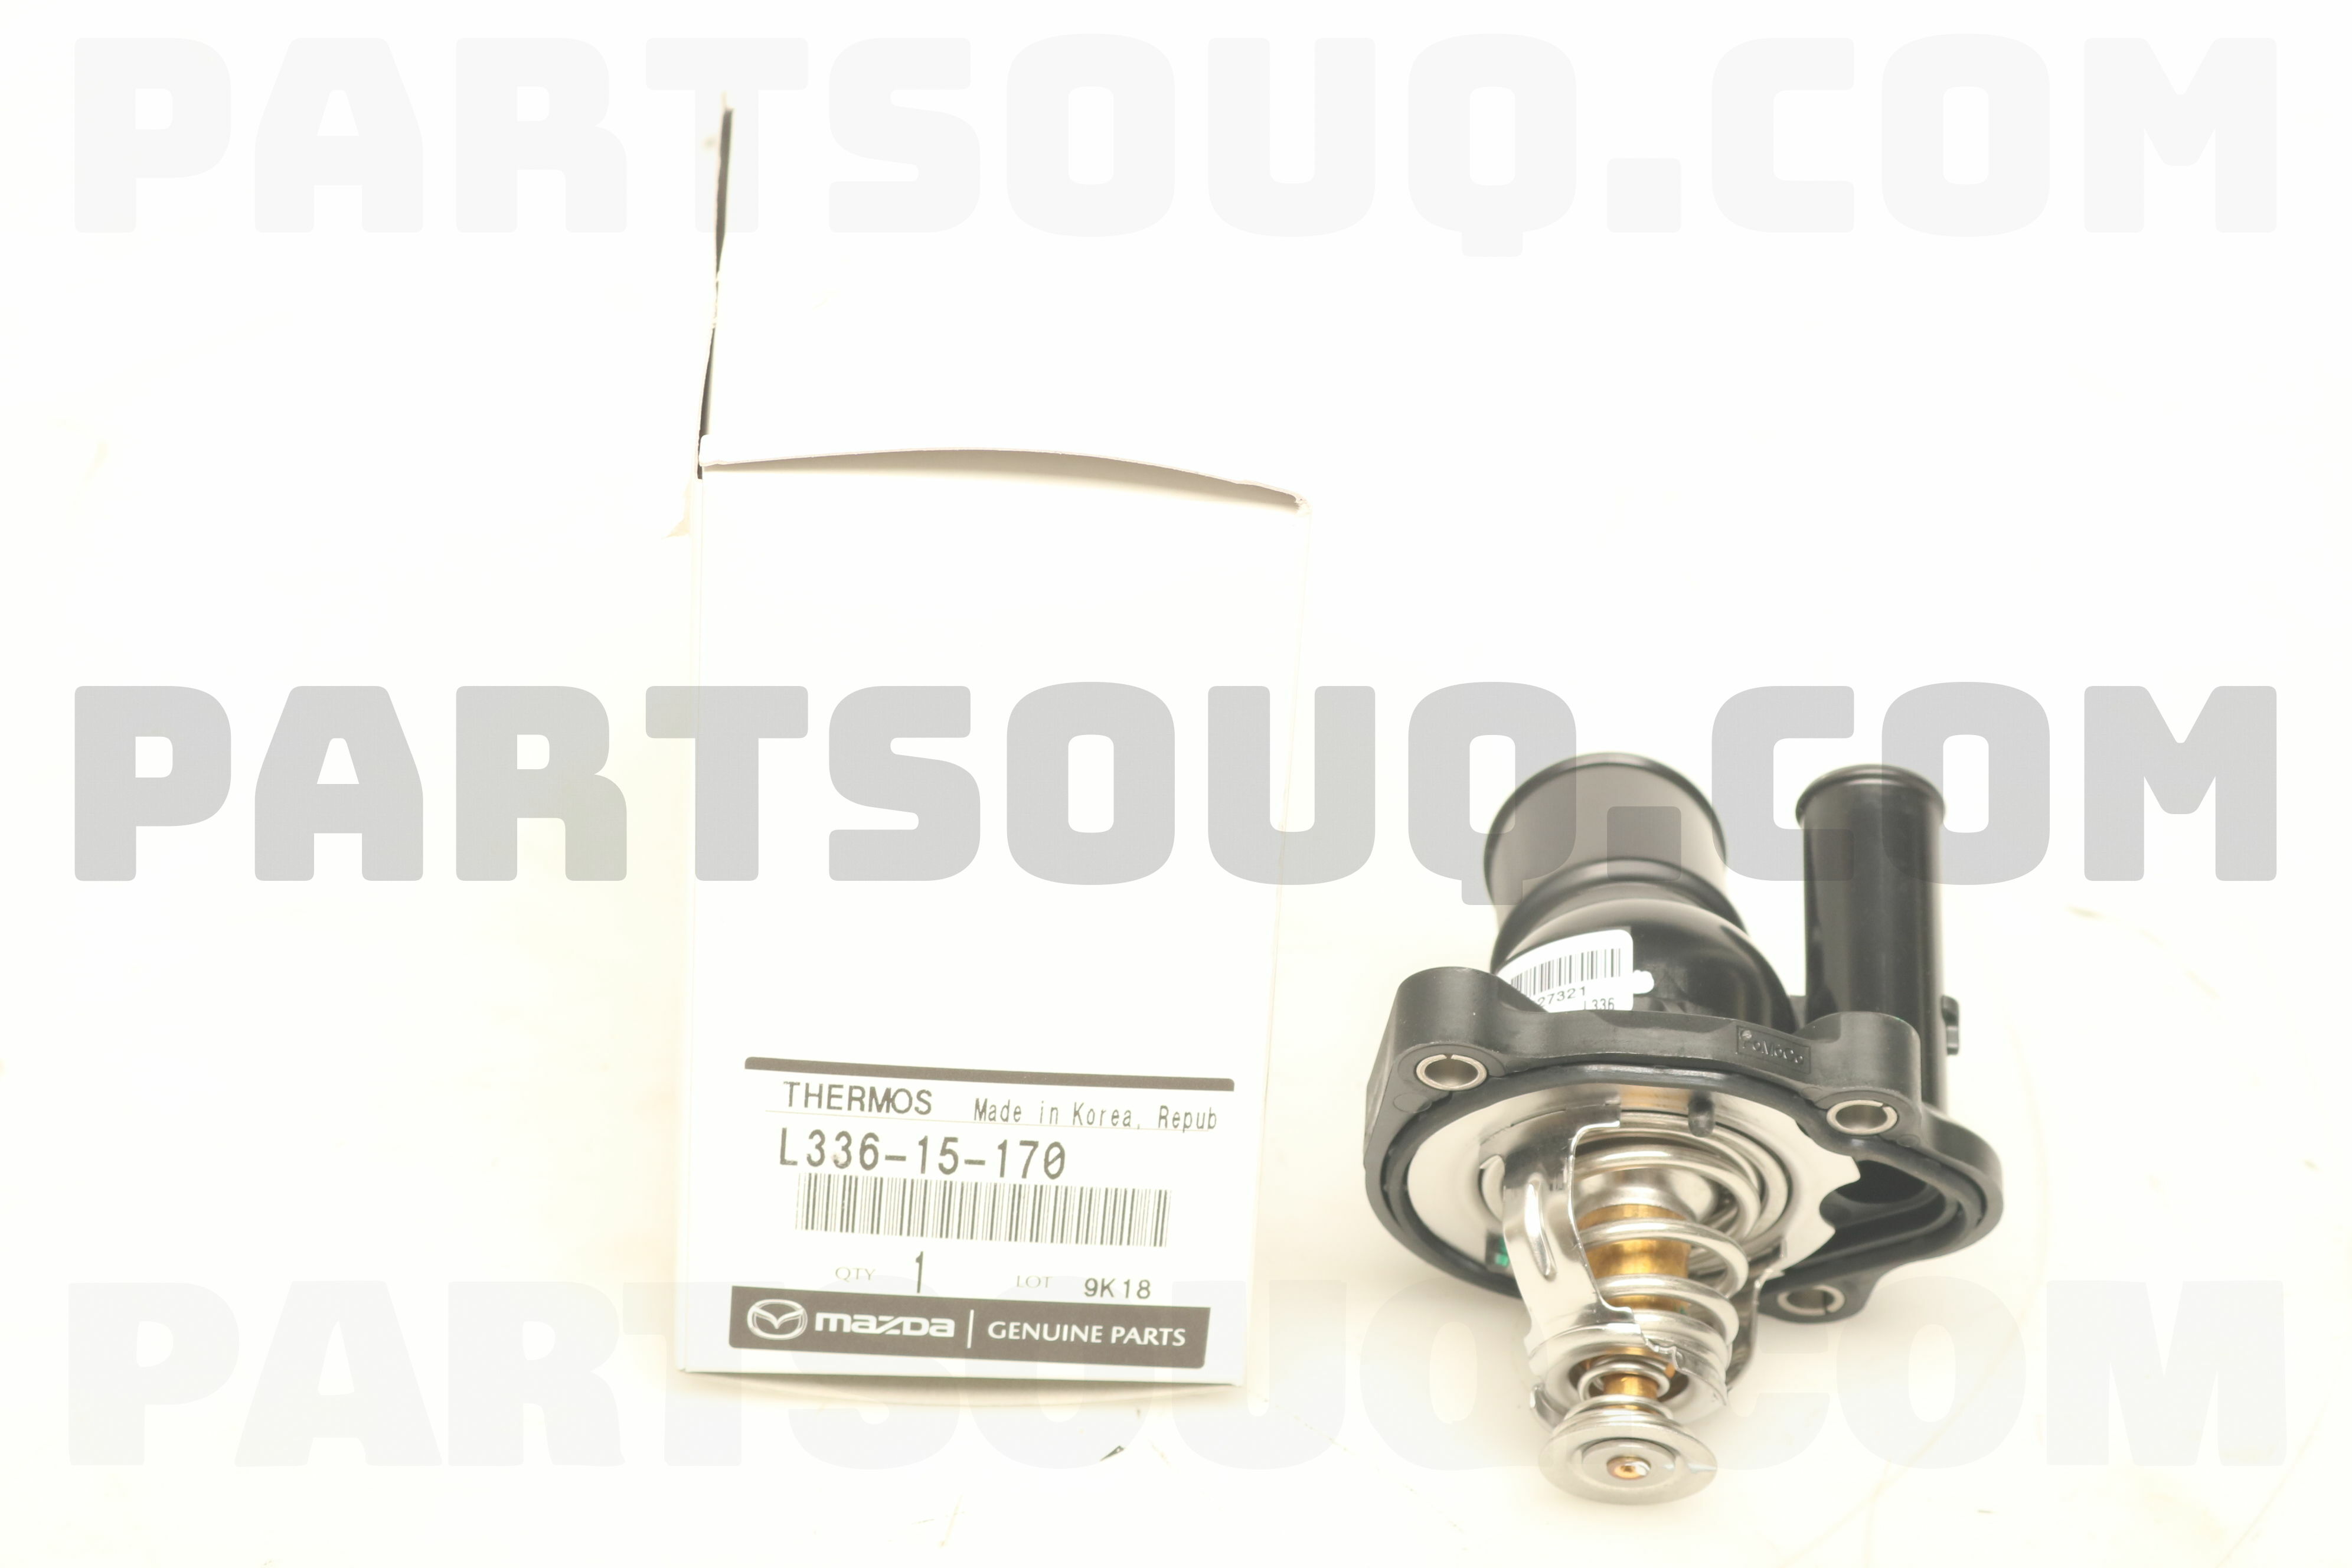 Details about   L33615170 Genuine Mazda THERMOSTAT & COVER L336-15-170